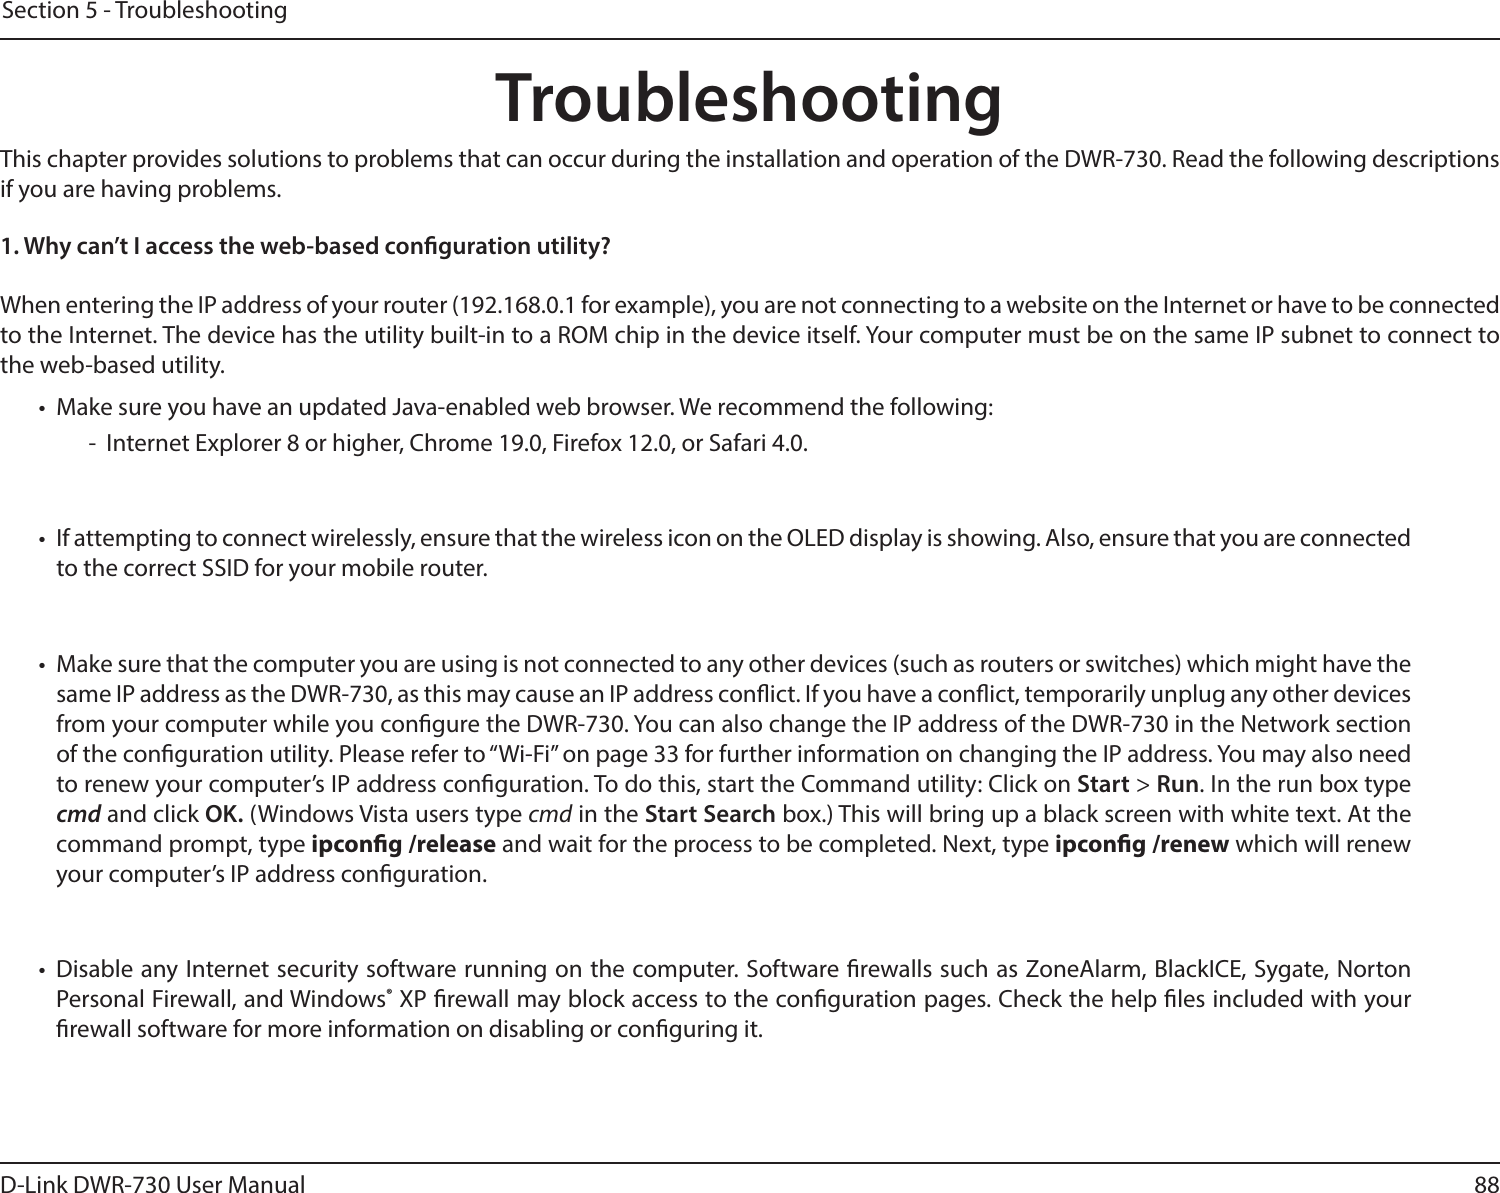 88D-Link DWR-730 User ManualSection 5 - TroubleshootingTroubleshootingThis chapter provides solutions to problems that can occur during the installation and operation of the DWR-730. Read the following descriptions if you are having problems.1. Why can’t I access the web-based conguration utility?When entering the IP address of your router (192.168.0.1 for example), you are not connecting to a website on the Internet or have to be connected to the Internet. The device has the utility built-in to a ROM chip in the device itself. Your computer must be on the same IP subnet to connect to the web-based utility. •  Make sure you have an updated Java-enabled web browser. We recommend the following:  -  Internet Explorer 8 or higher, Chrome 19.0, Firefox 12.0, or Safari 4.0.•  If attempting to connect wirelessly, ensure that the wireless icon on the OLED display is showing. Also, ensure that you are connected to the correct SSID for your mobile router. •  Make sure that the computer you are using is not connected to any other devices (such as routers or switches) which might have the same IP address as the DWR-730, as this may cause an IP address conict. If you have a conict, temporarily unplug any other devices from your computer while you congure the DWR-730. You can also change the IP address of the DWR-730 in the Network section of the conguration utility. Please refer to “Wi-Fi” on page 33 for further information on changing the IP address. You may also need to renew your computer’s IP address conguration. To do this, start the Command utility: Click on Start &gt; Run. In the run box type cmd and click OK. (Windows Vista users type cmd in the Start Search box.) This will bring up a black screen with white text. At the command prompt, type ipcong /release and wait for the process to be completed. Next, type ipcong /renew which will renew your computer’s IP address conguration. •  Disable any Internet security software running on the computer. Software rewalls such as ZoneAlarm, BlackICE, Sygate, Norton Personal Firewall, and Windows® XP rewall may block access to the conguration pages. Check the help les included with your rewall software for more information on disabling or conguring it.